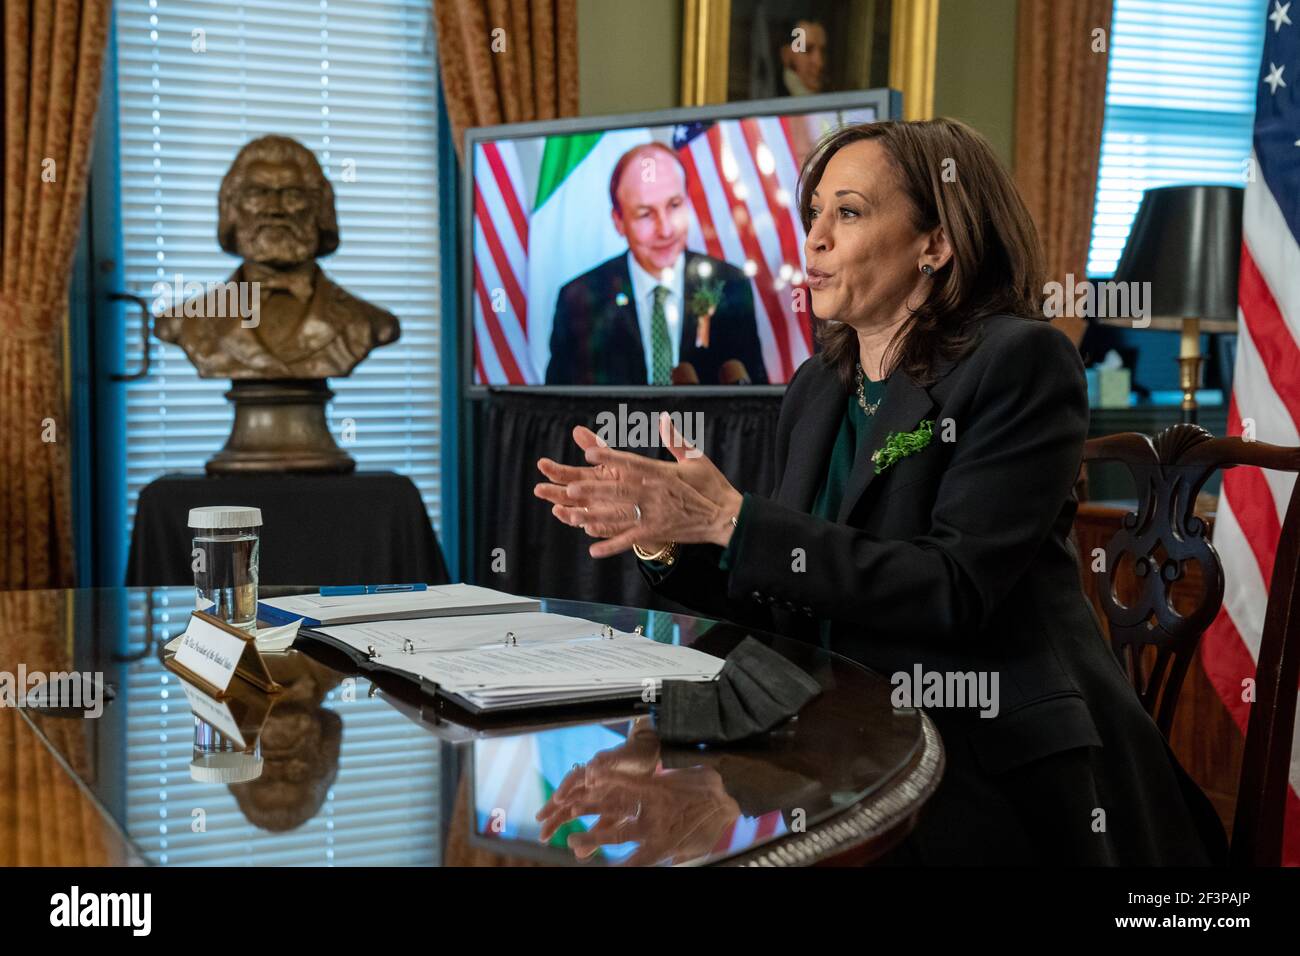 United States Vice President Kamala Harris hosts Micheál Martin, Prime Minister of Ireland, during a virtual bilateral meeting in the Vice President's Ceremonial Office in Washington, U.S., March 17, 2021.Credit: Ken Cedeno/Pool via CNP /MediaPunch Stock Photo